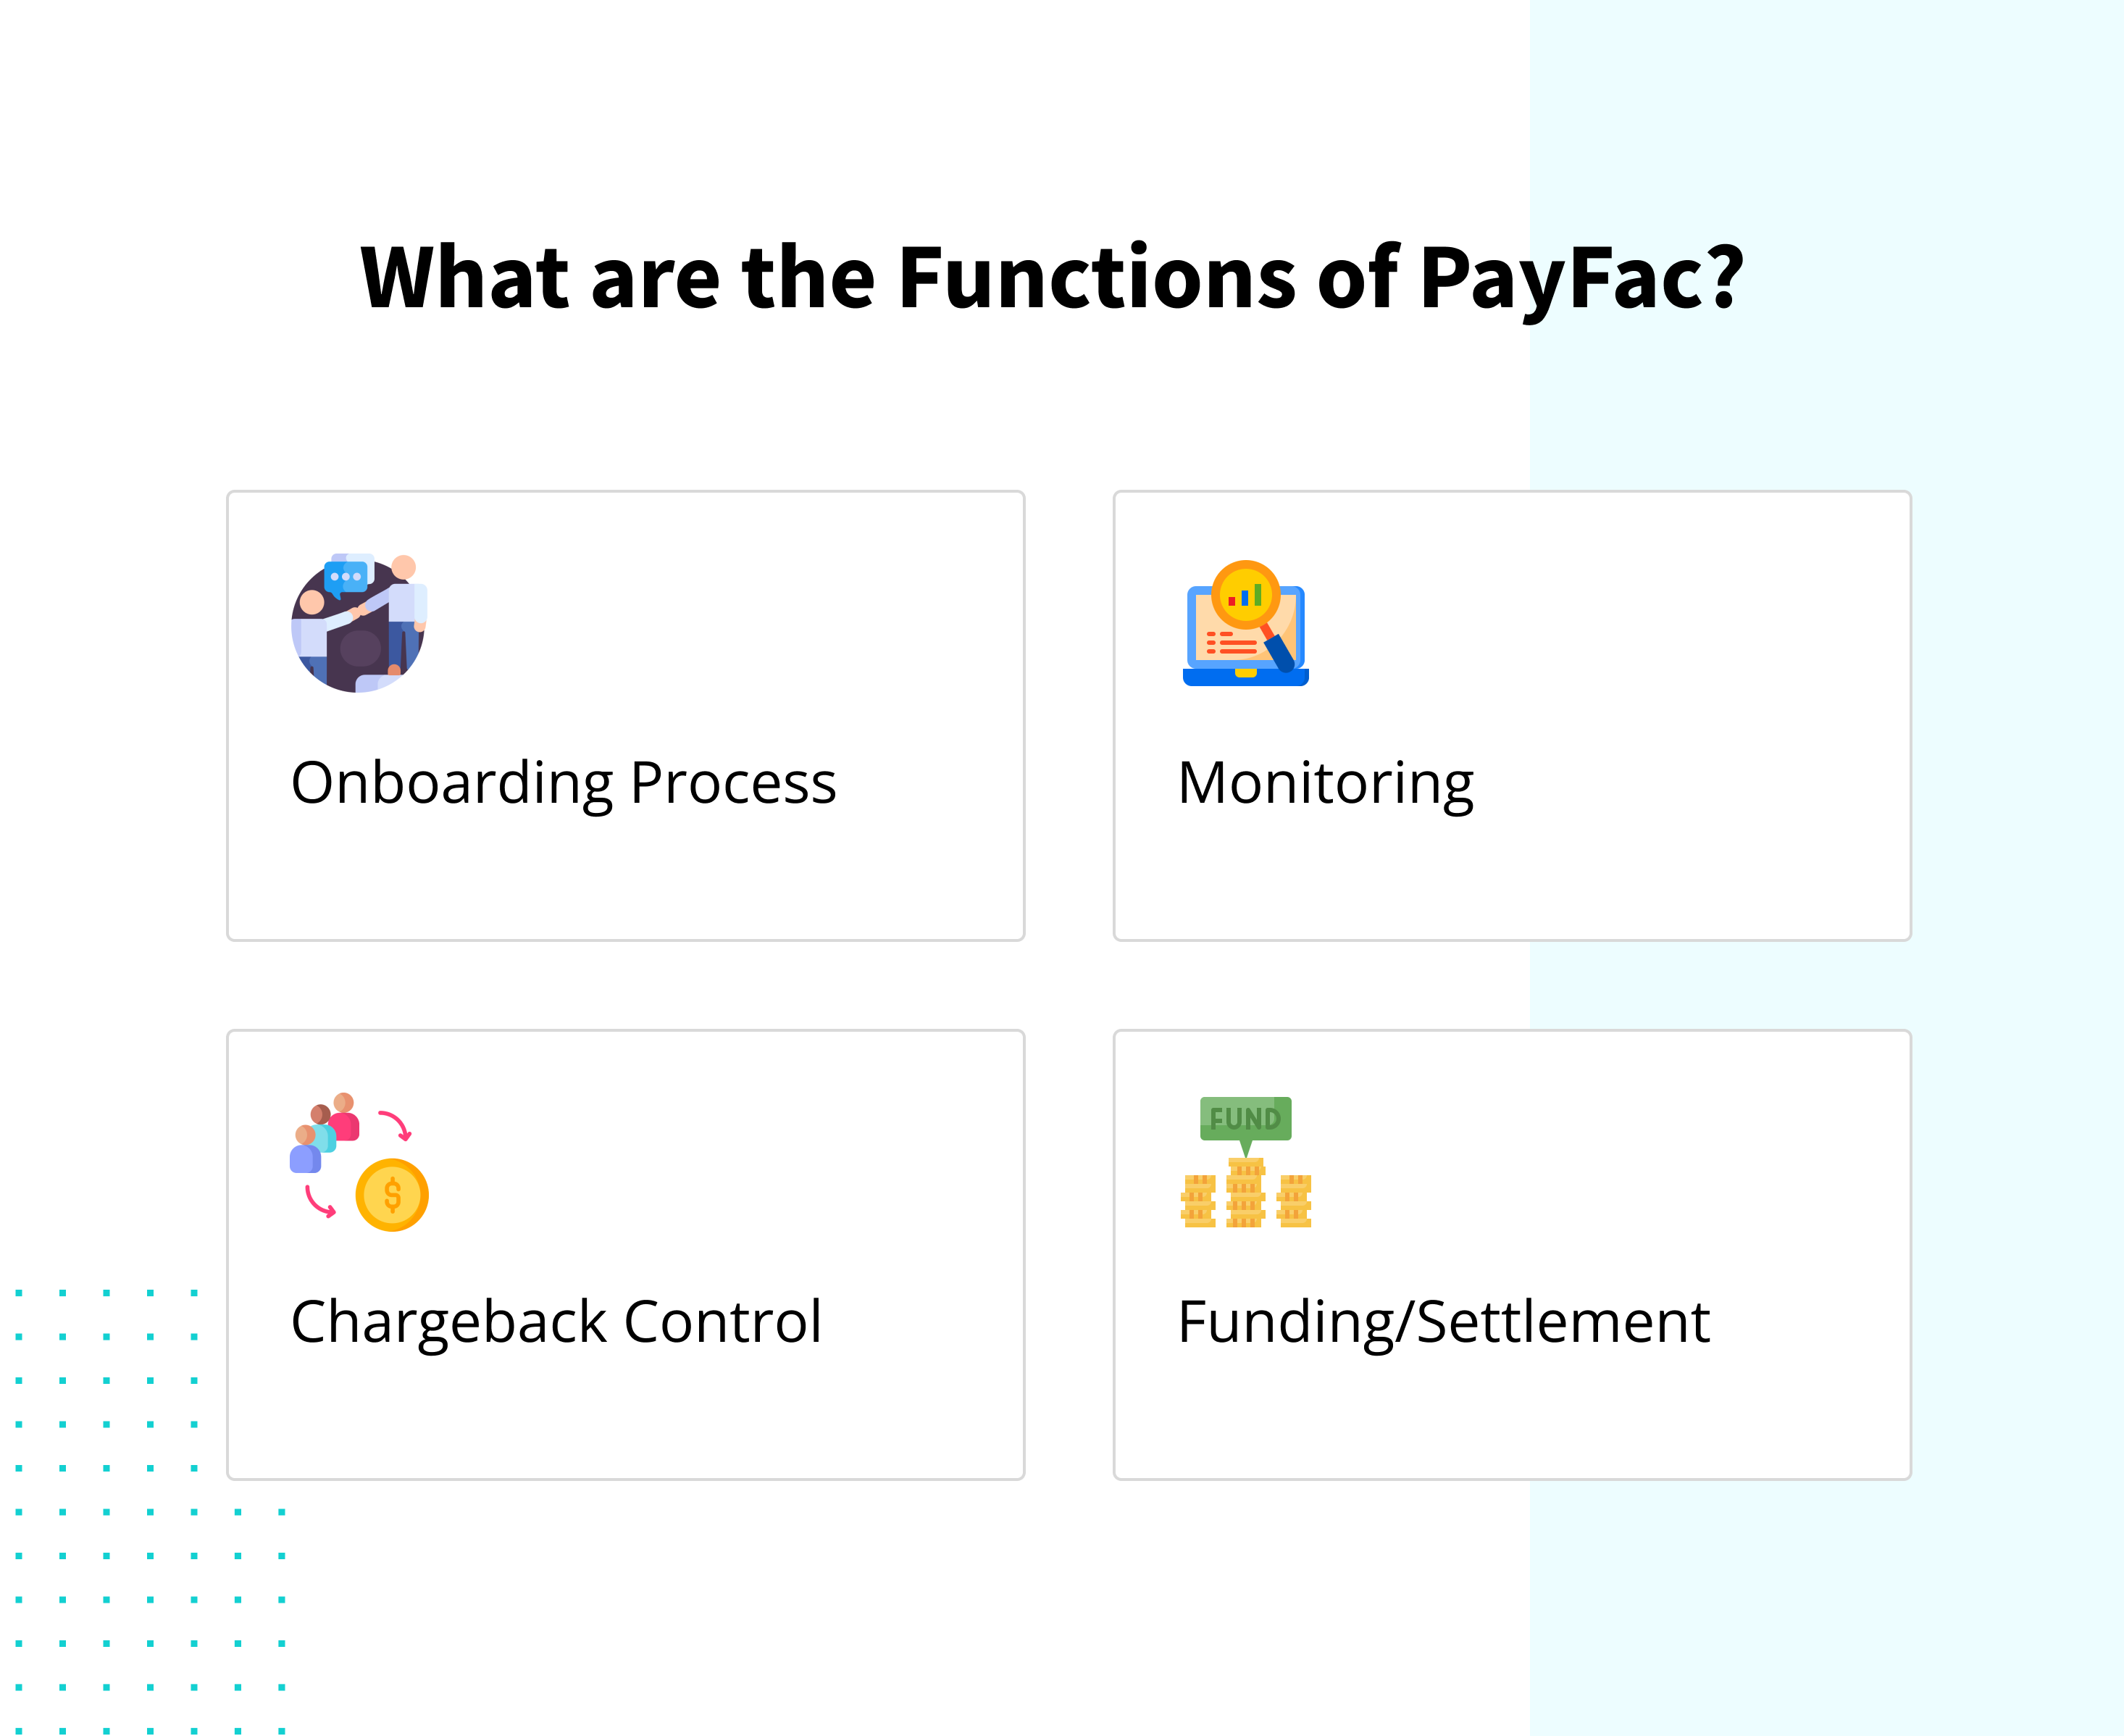 Functions of PayFac